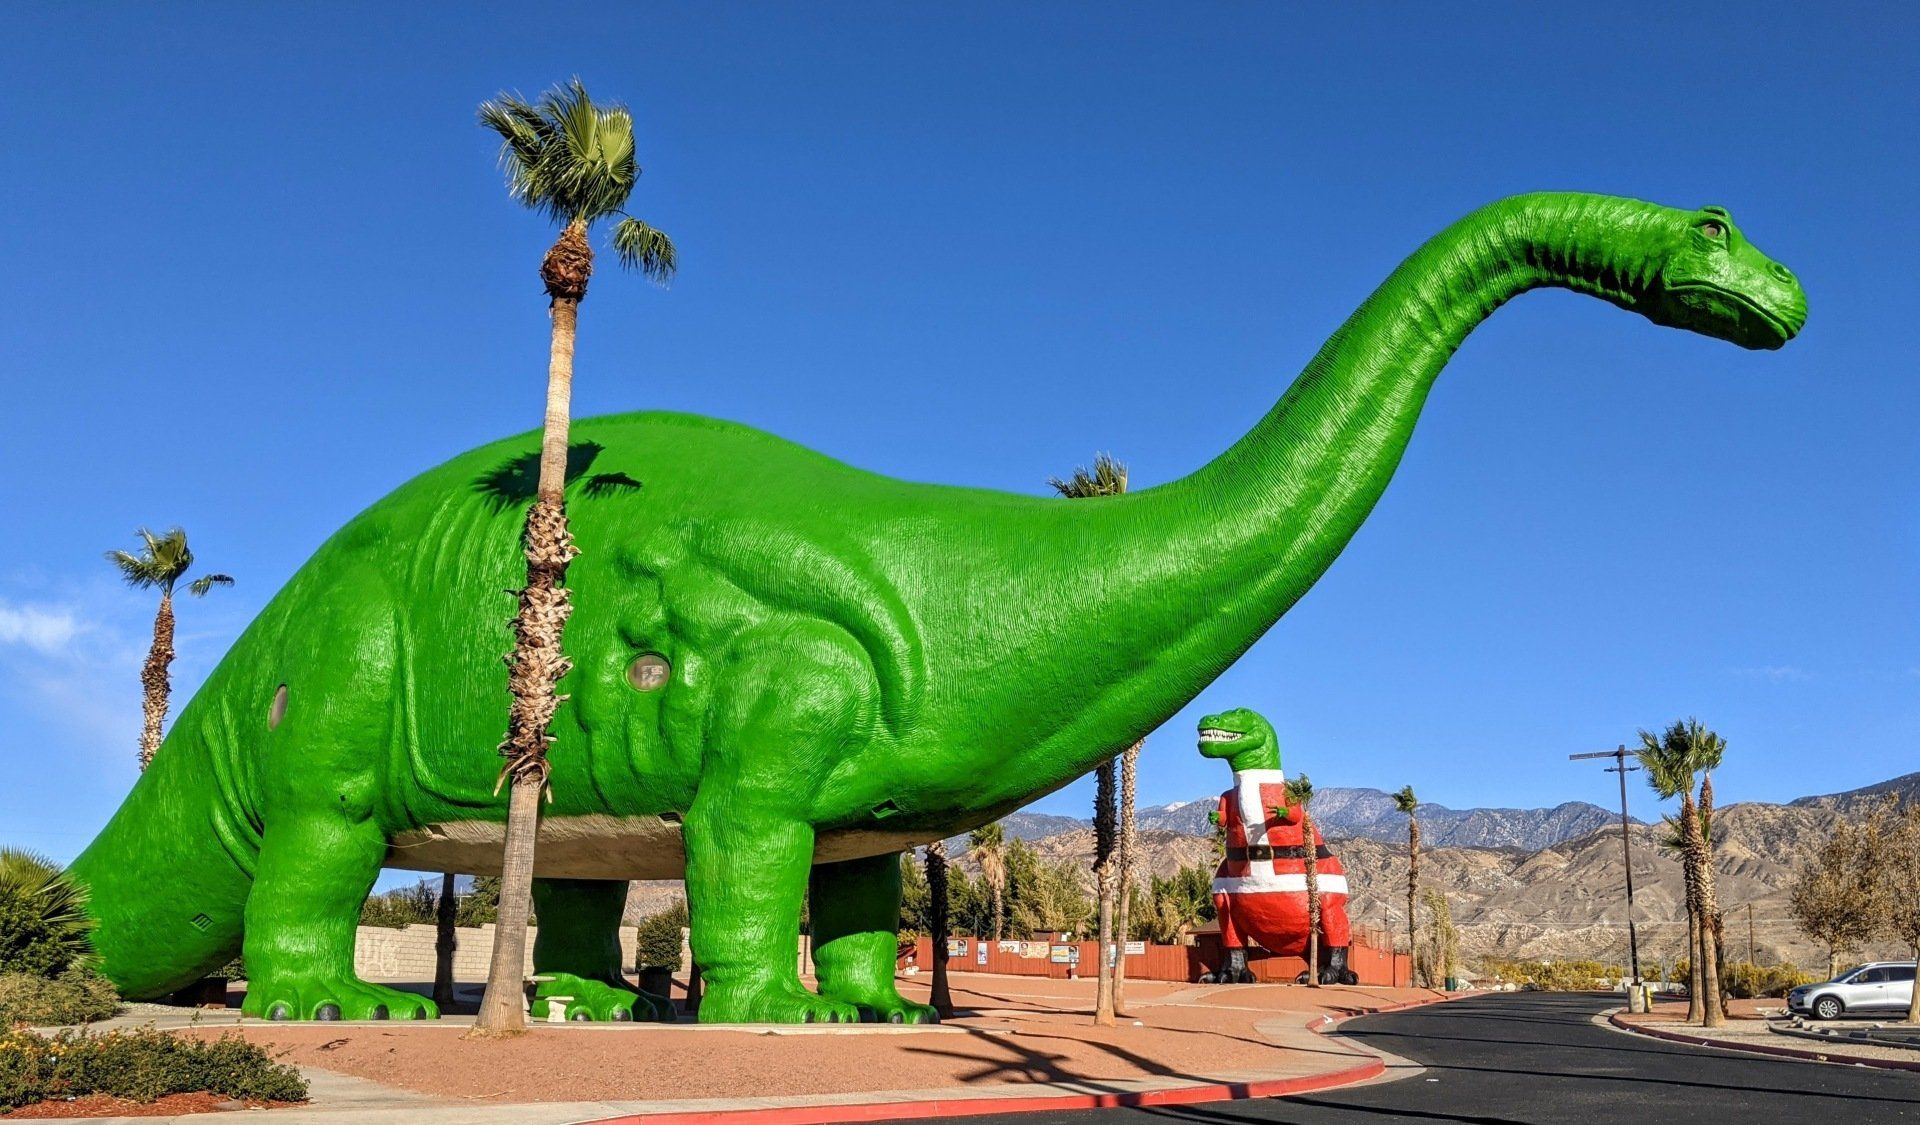 World's Biggest Dinosaur Sculptures: world record set by the Cabazon Dinosaurs